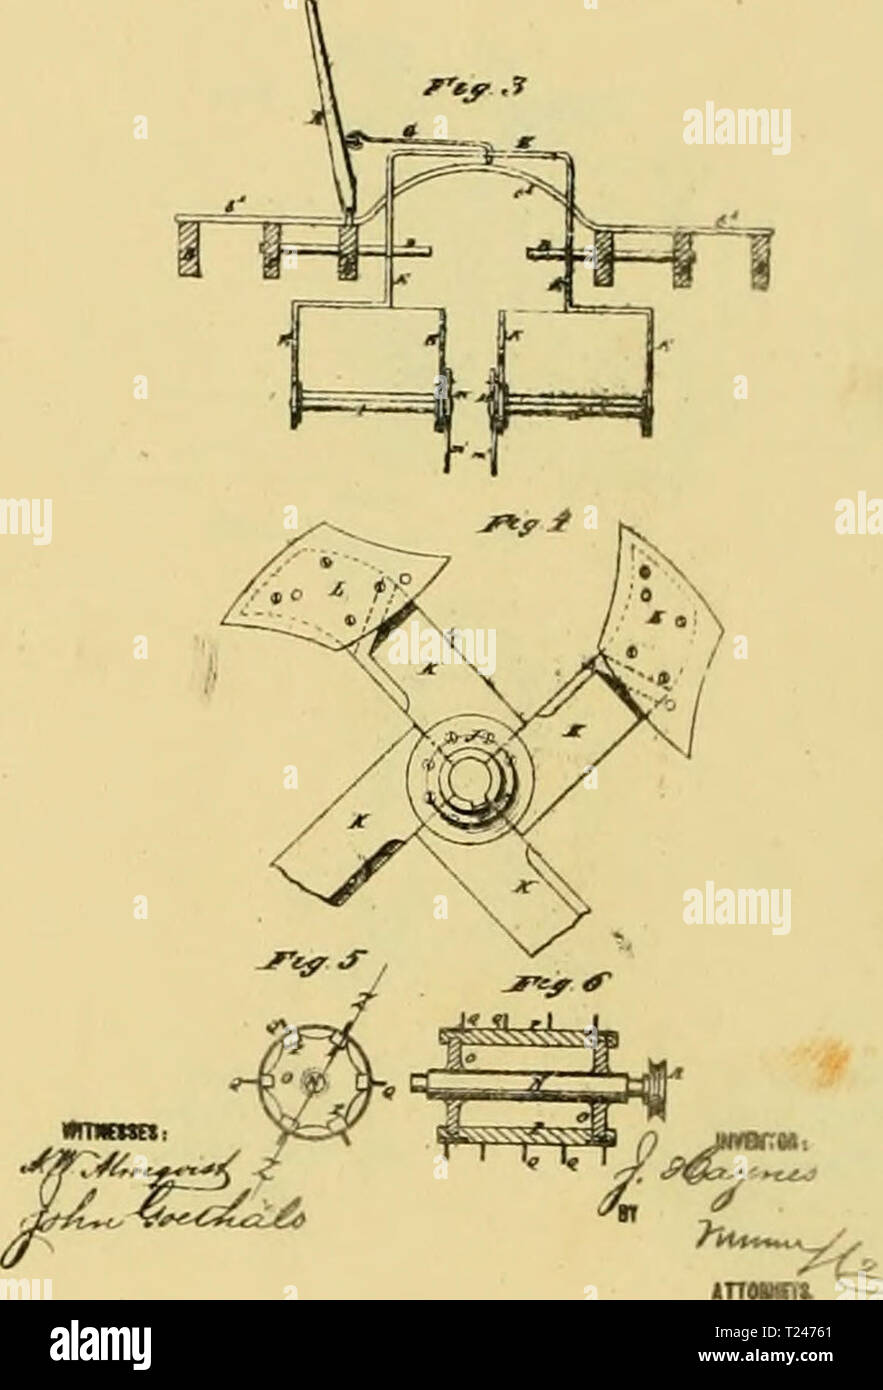 Archive image from page 313 of Digest of agricultural implements, patented Digest of agricultural implements, patented in the United States from A.D. 1789 to July 1881 ..  digestofagricult02alle Year: 1886  J. BATKIS. cTJiiiriToa. now. is&gt; hasmw »« ns.Slf. r.i.....i j.i, i(. i»,«    S. B. SBEKHiN. It570L7IHO GAKSZa ASD F1EJ.D BOB. Ho. 1S1.870. Flliiul Sigt. 5, 2Shists-Slieet 1. W. UcC. KAIBES. COUBiVED SFADino. FL0WIS7 AHD STALE-CUTTIVO SACSnS. No. 181,959. FiUattd Sopt. S, 1876. Stock Photo